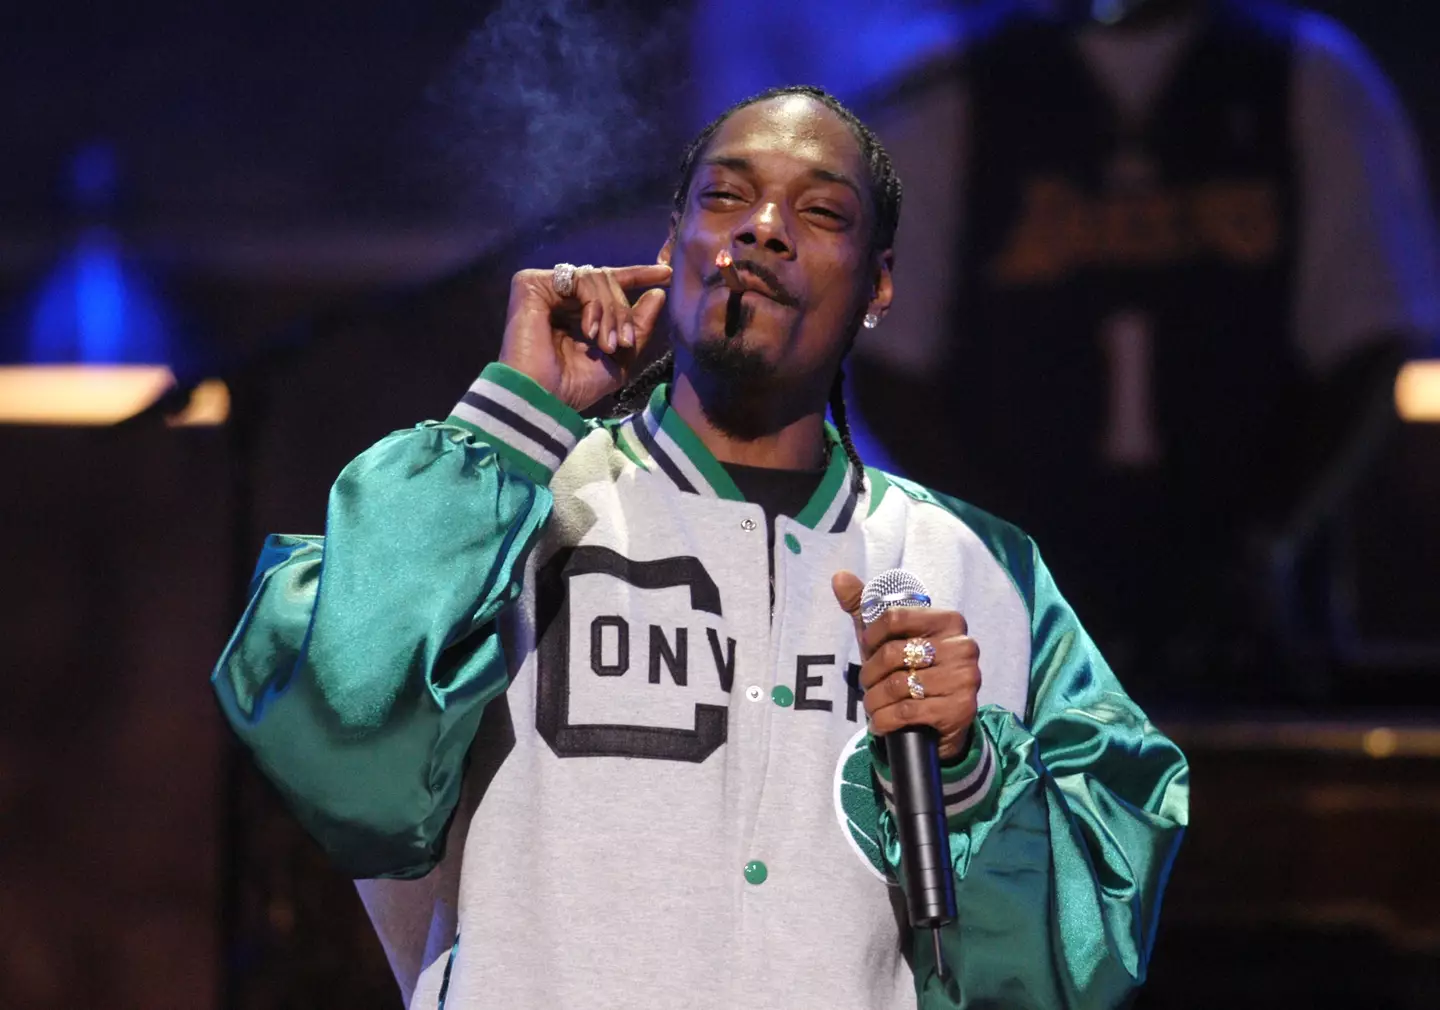 Snoop has called it quits on smoking.